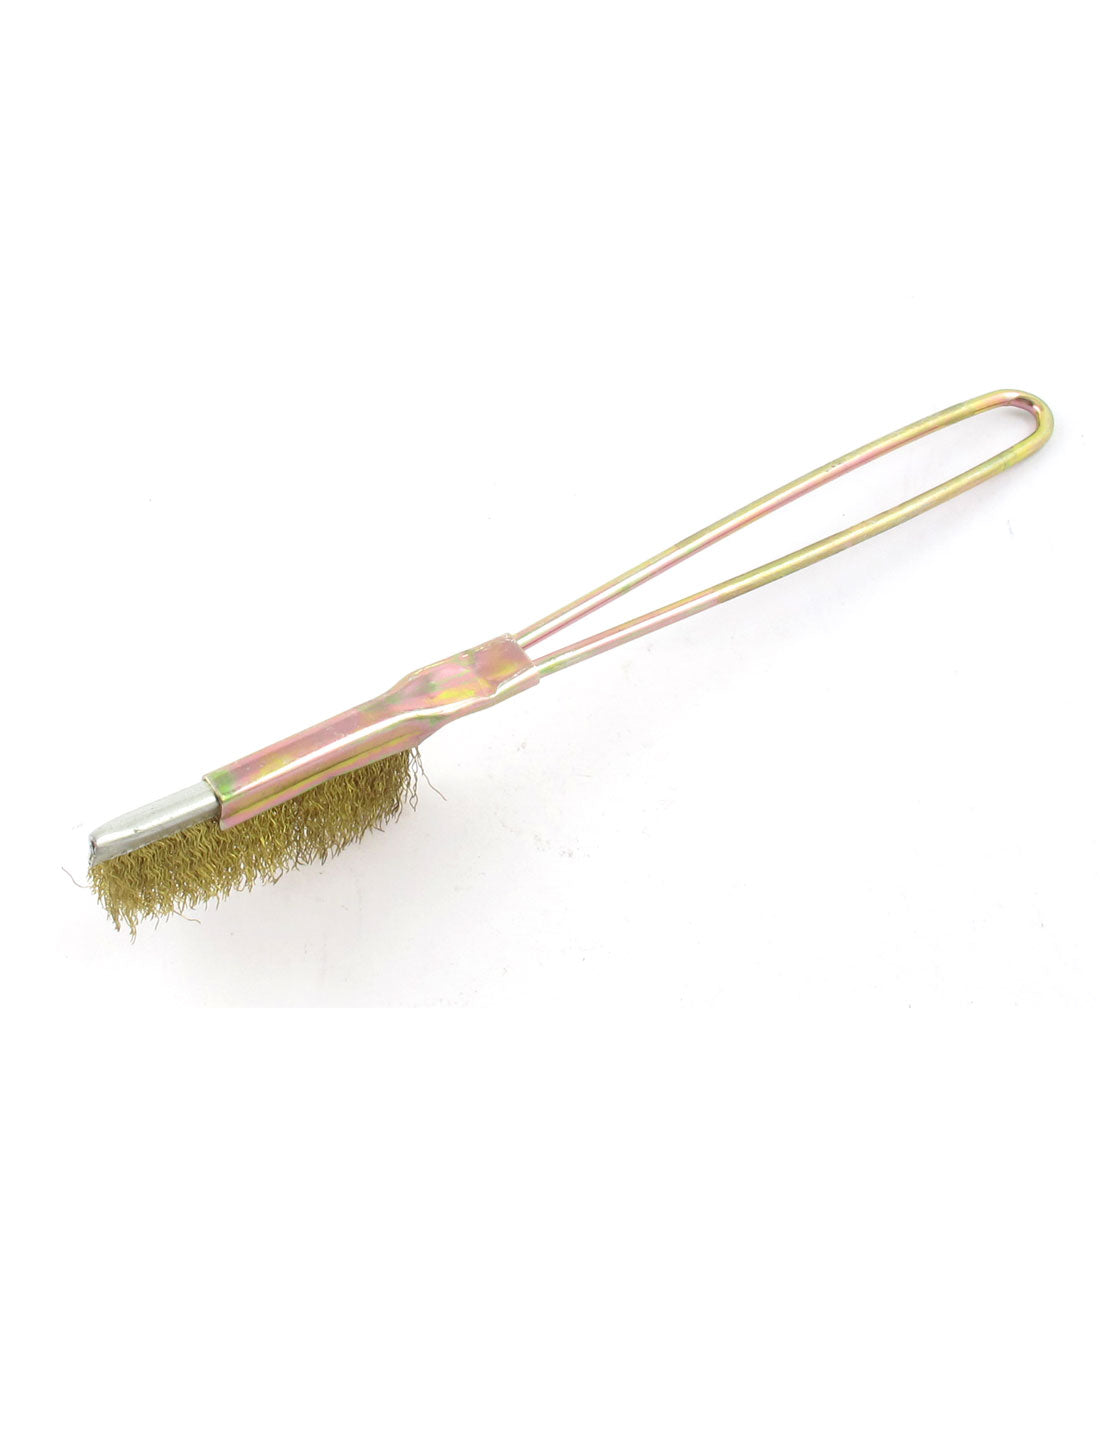 uxcell Uxcell Bronze Tone Handle Handheld Rust Stain Cleaning Yellow Steel Wire Brush 22cm Long